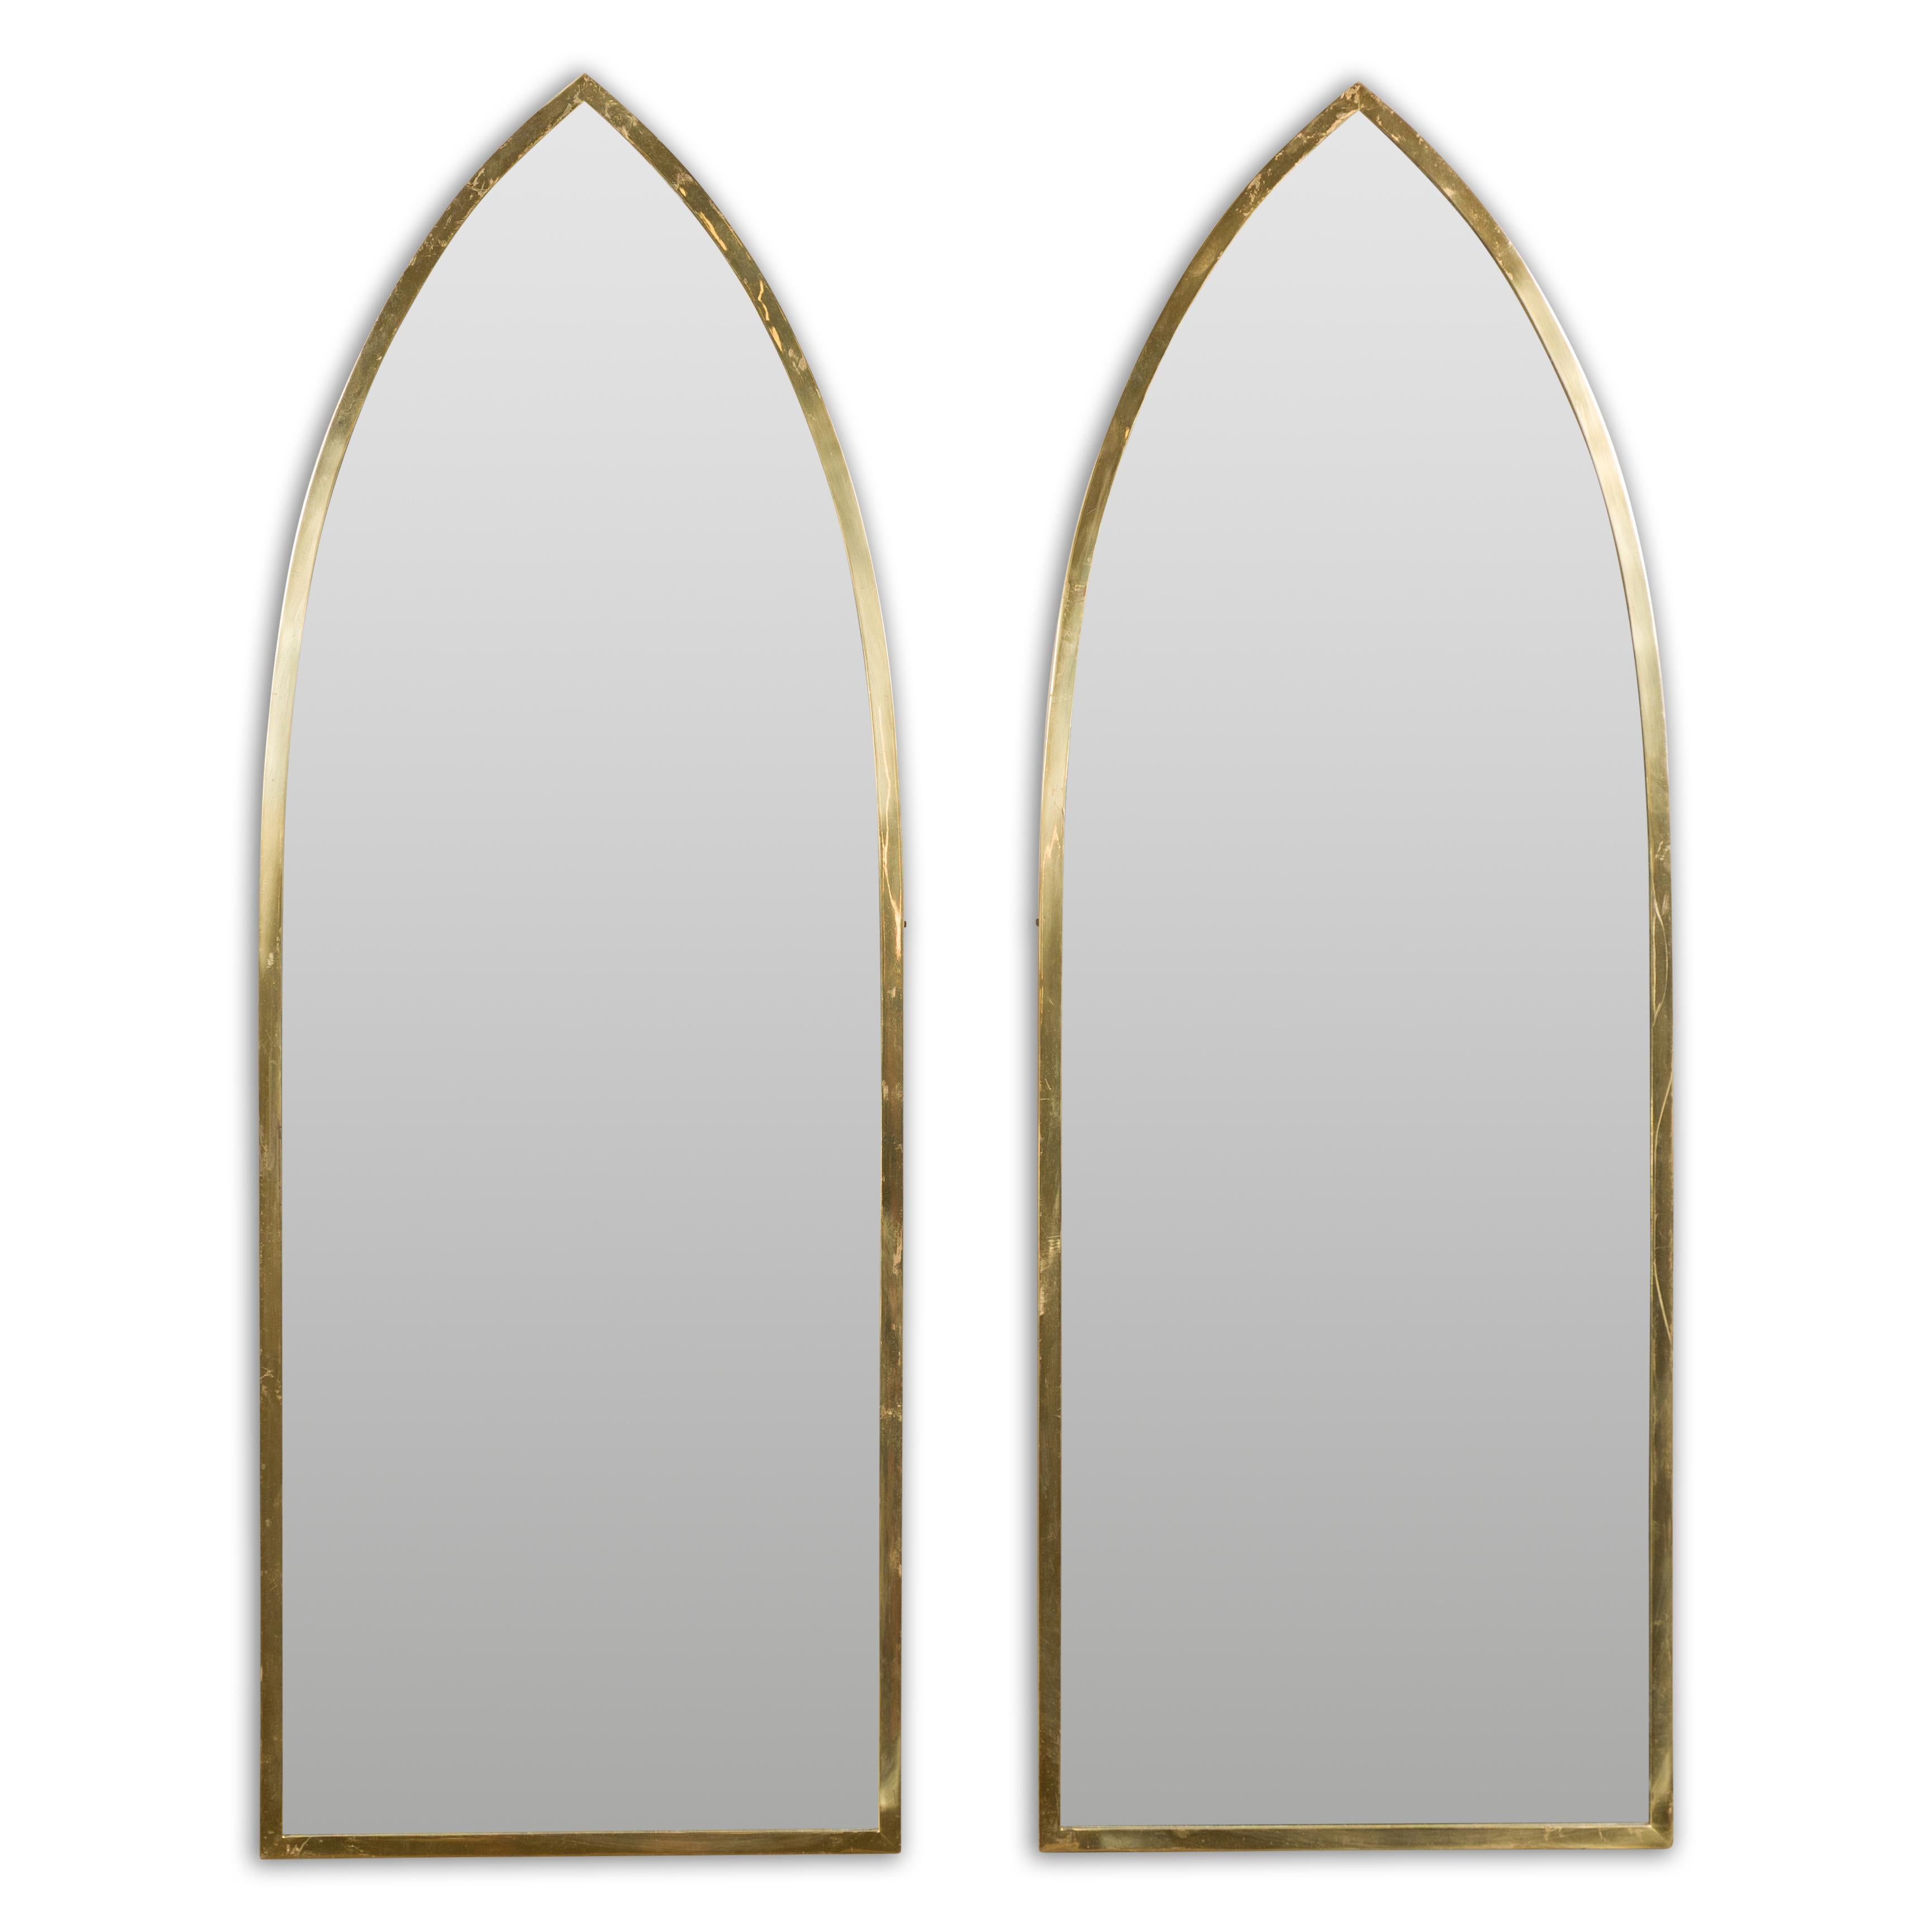 A pair of vintage Midcentury brass Gothic inspired mirrors from circa 1950 with broken arch silhouette and golden hue. Reflecting the timeless charm of the Midcentury era, this pair of vintage brass Gothic-inspired mirrors from circa 1950 resonates